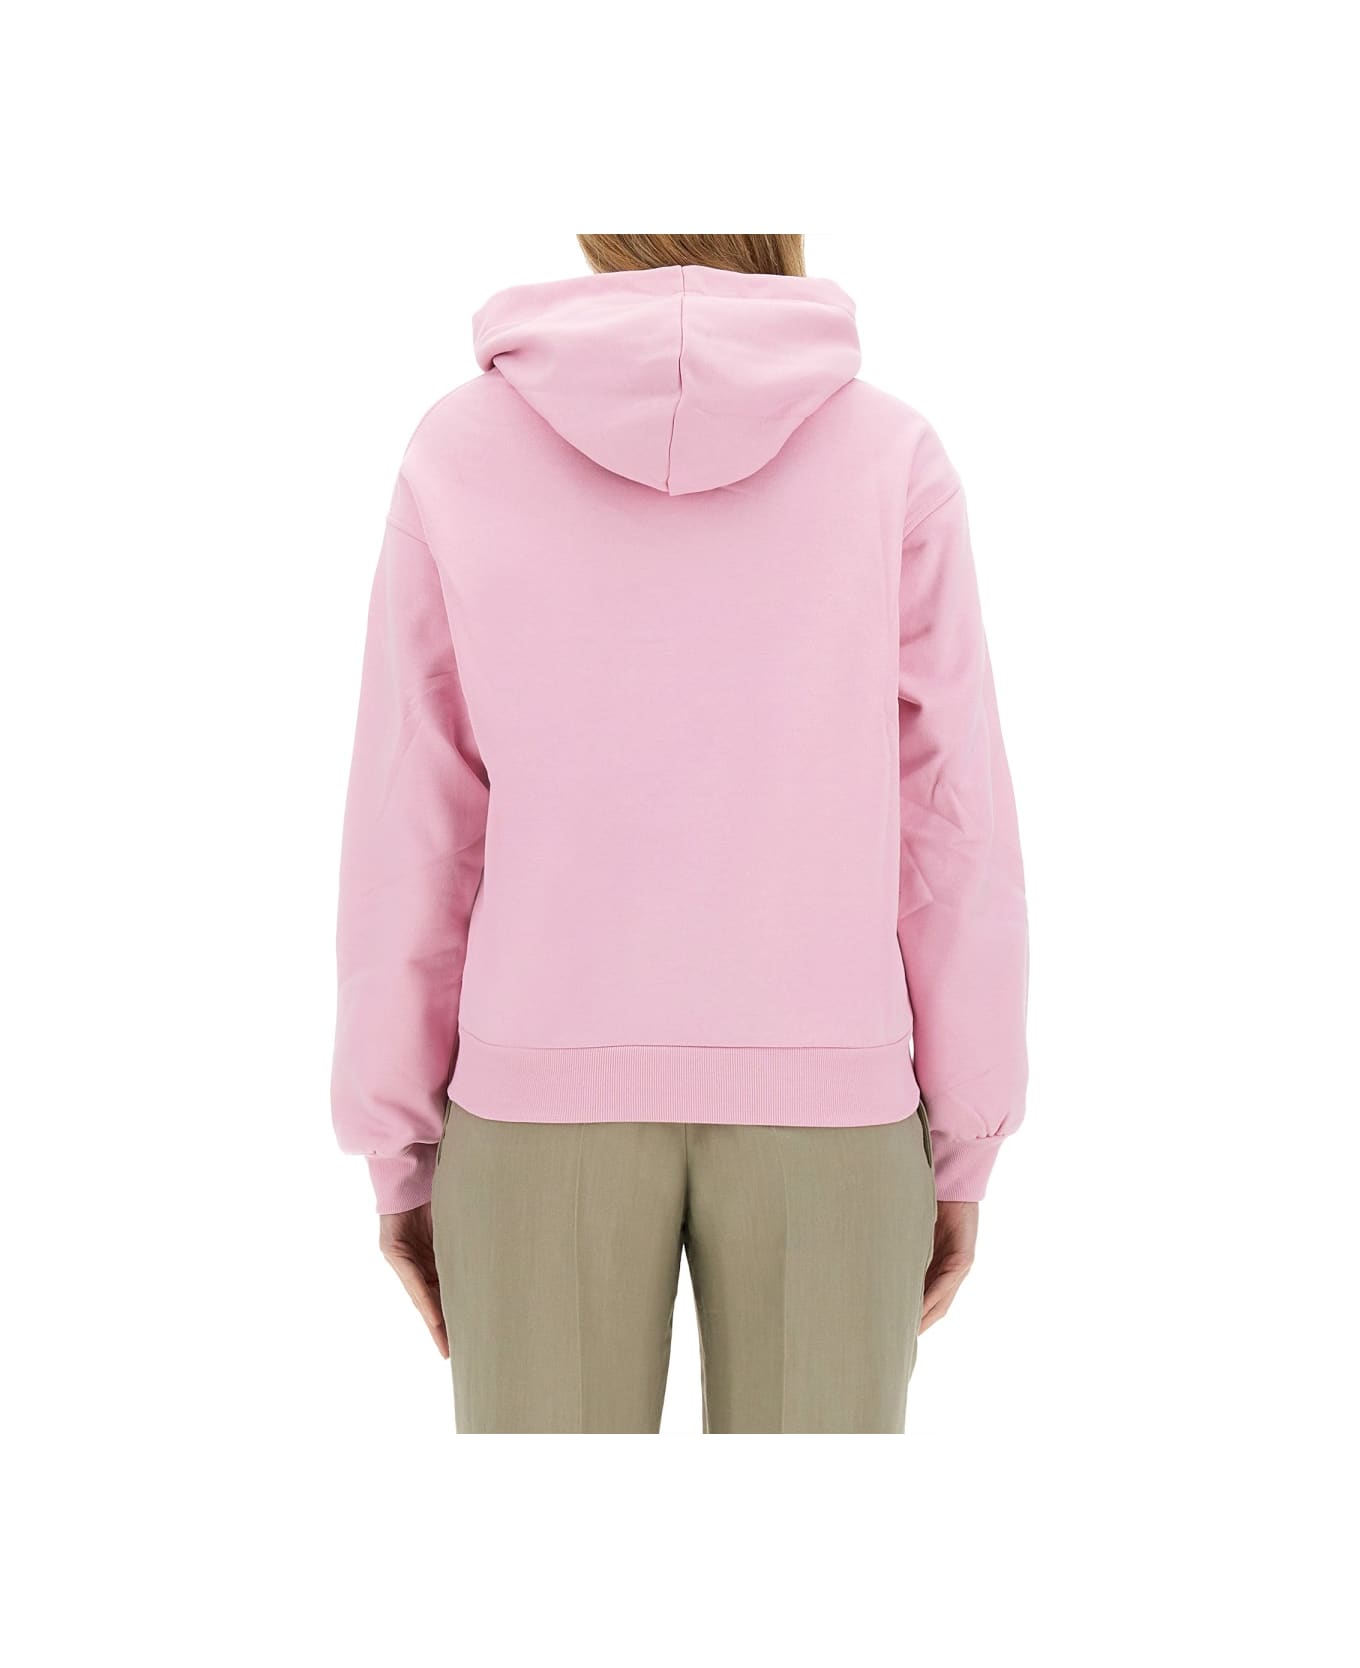 PS by Paul Smith Sweatshirt With Logo - PINK